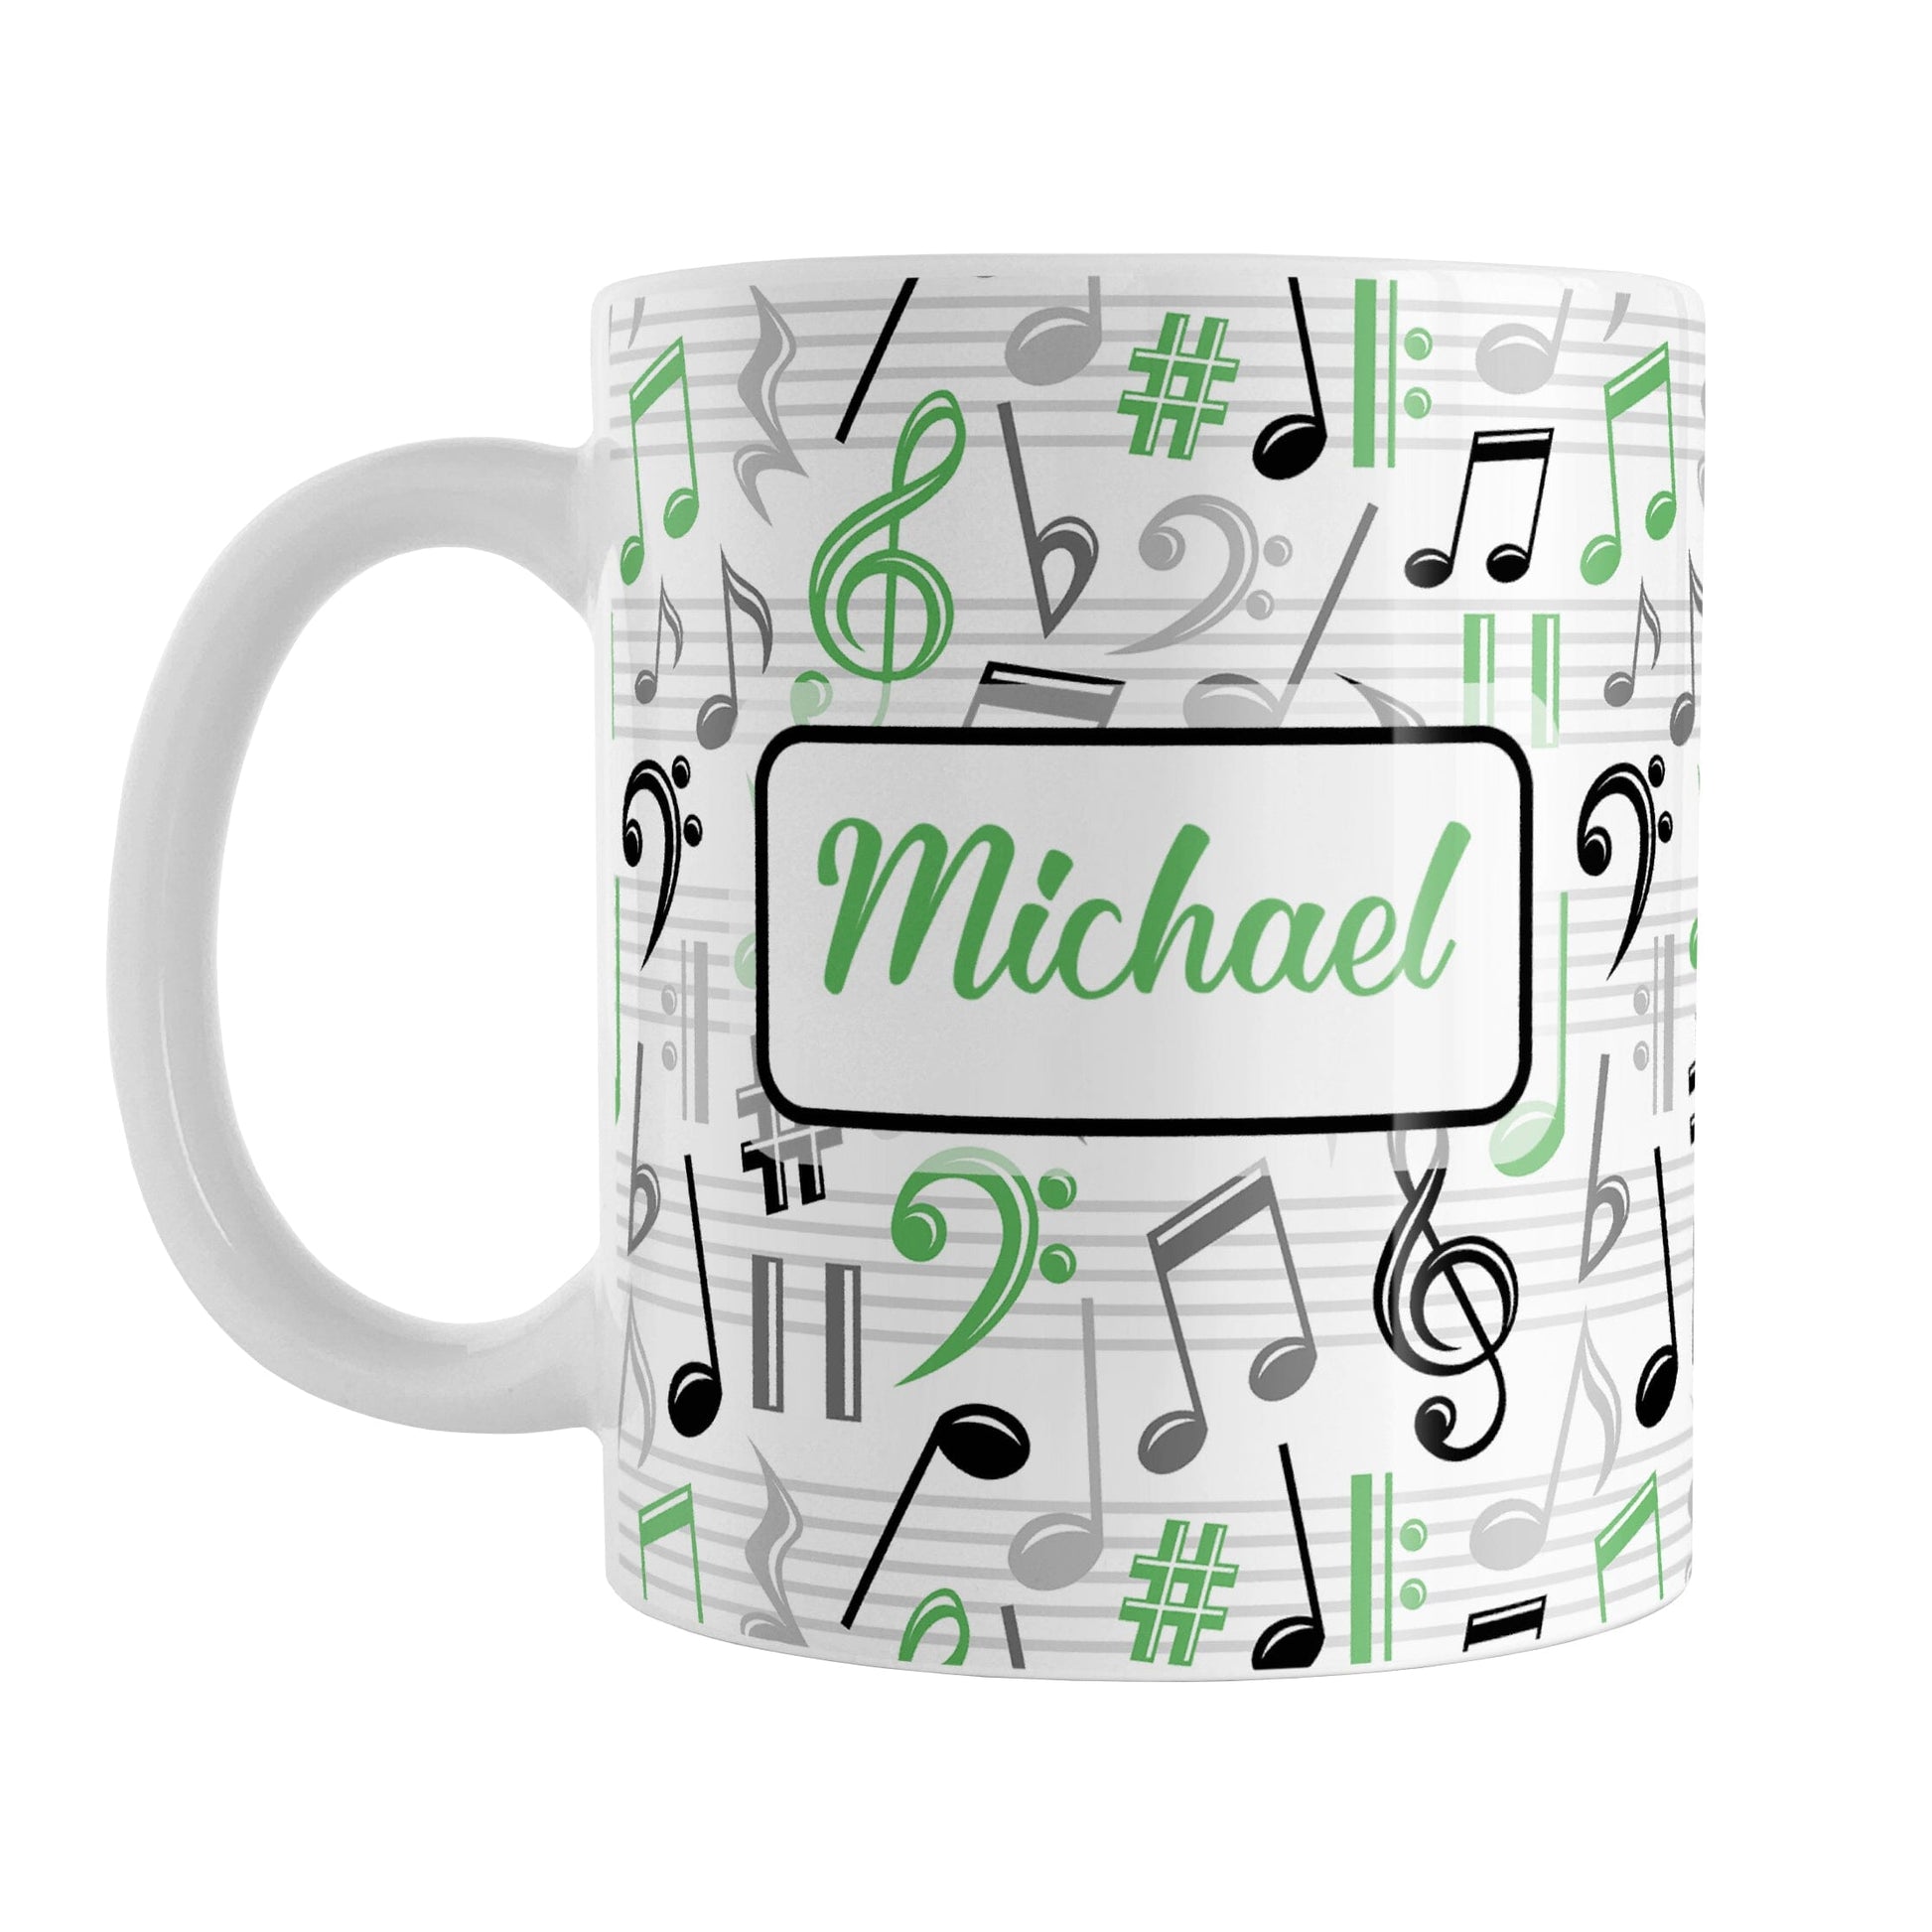 Personalized Green Music Notes Pattern Mug (11oz) at Amy's Coffee Mugs. A ceramic coffee mug designed with music notes and symbols in green, black, and gray in a pattern that wraps around the mug to the handle. Your personalized name is custom printed in a green script font on white over the music pattern design on both sides of the mug.